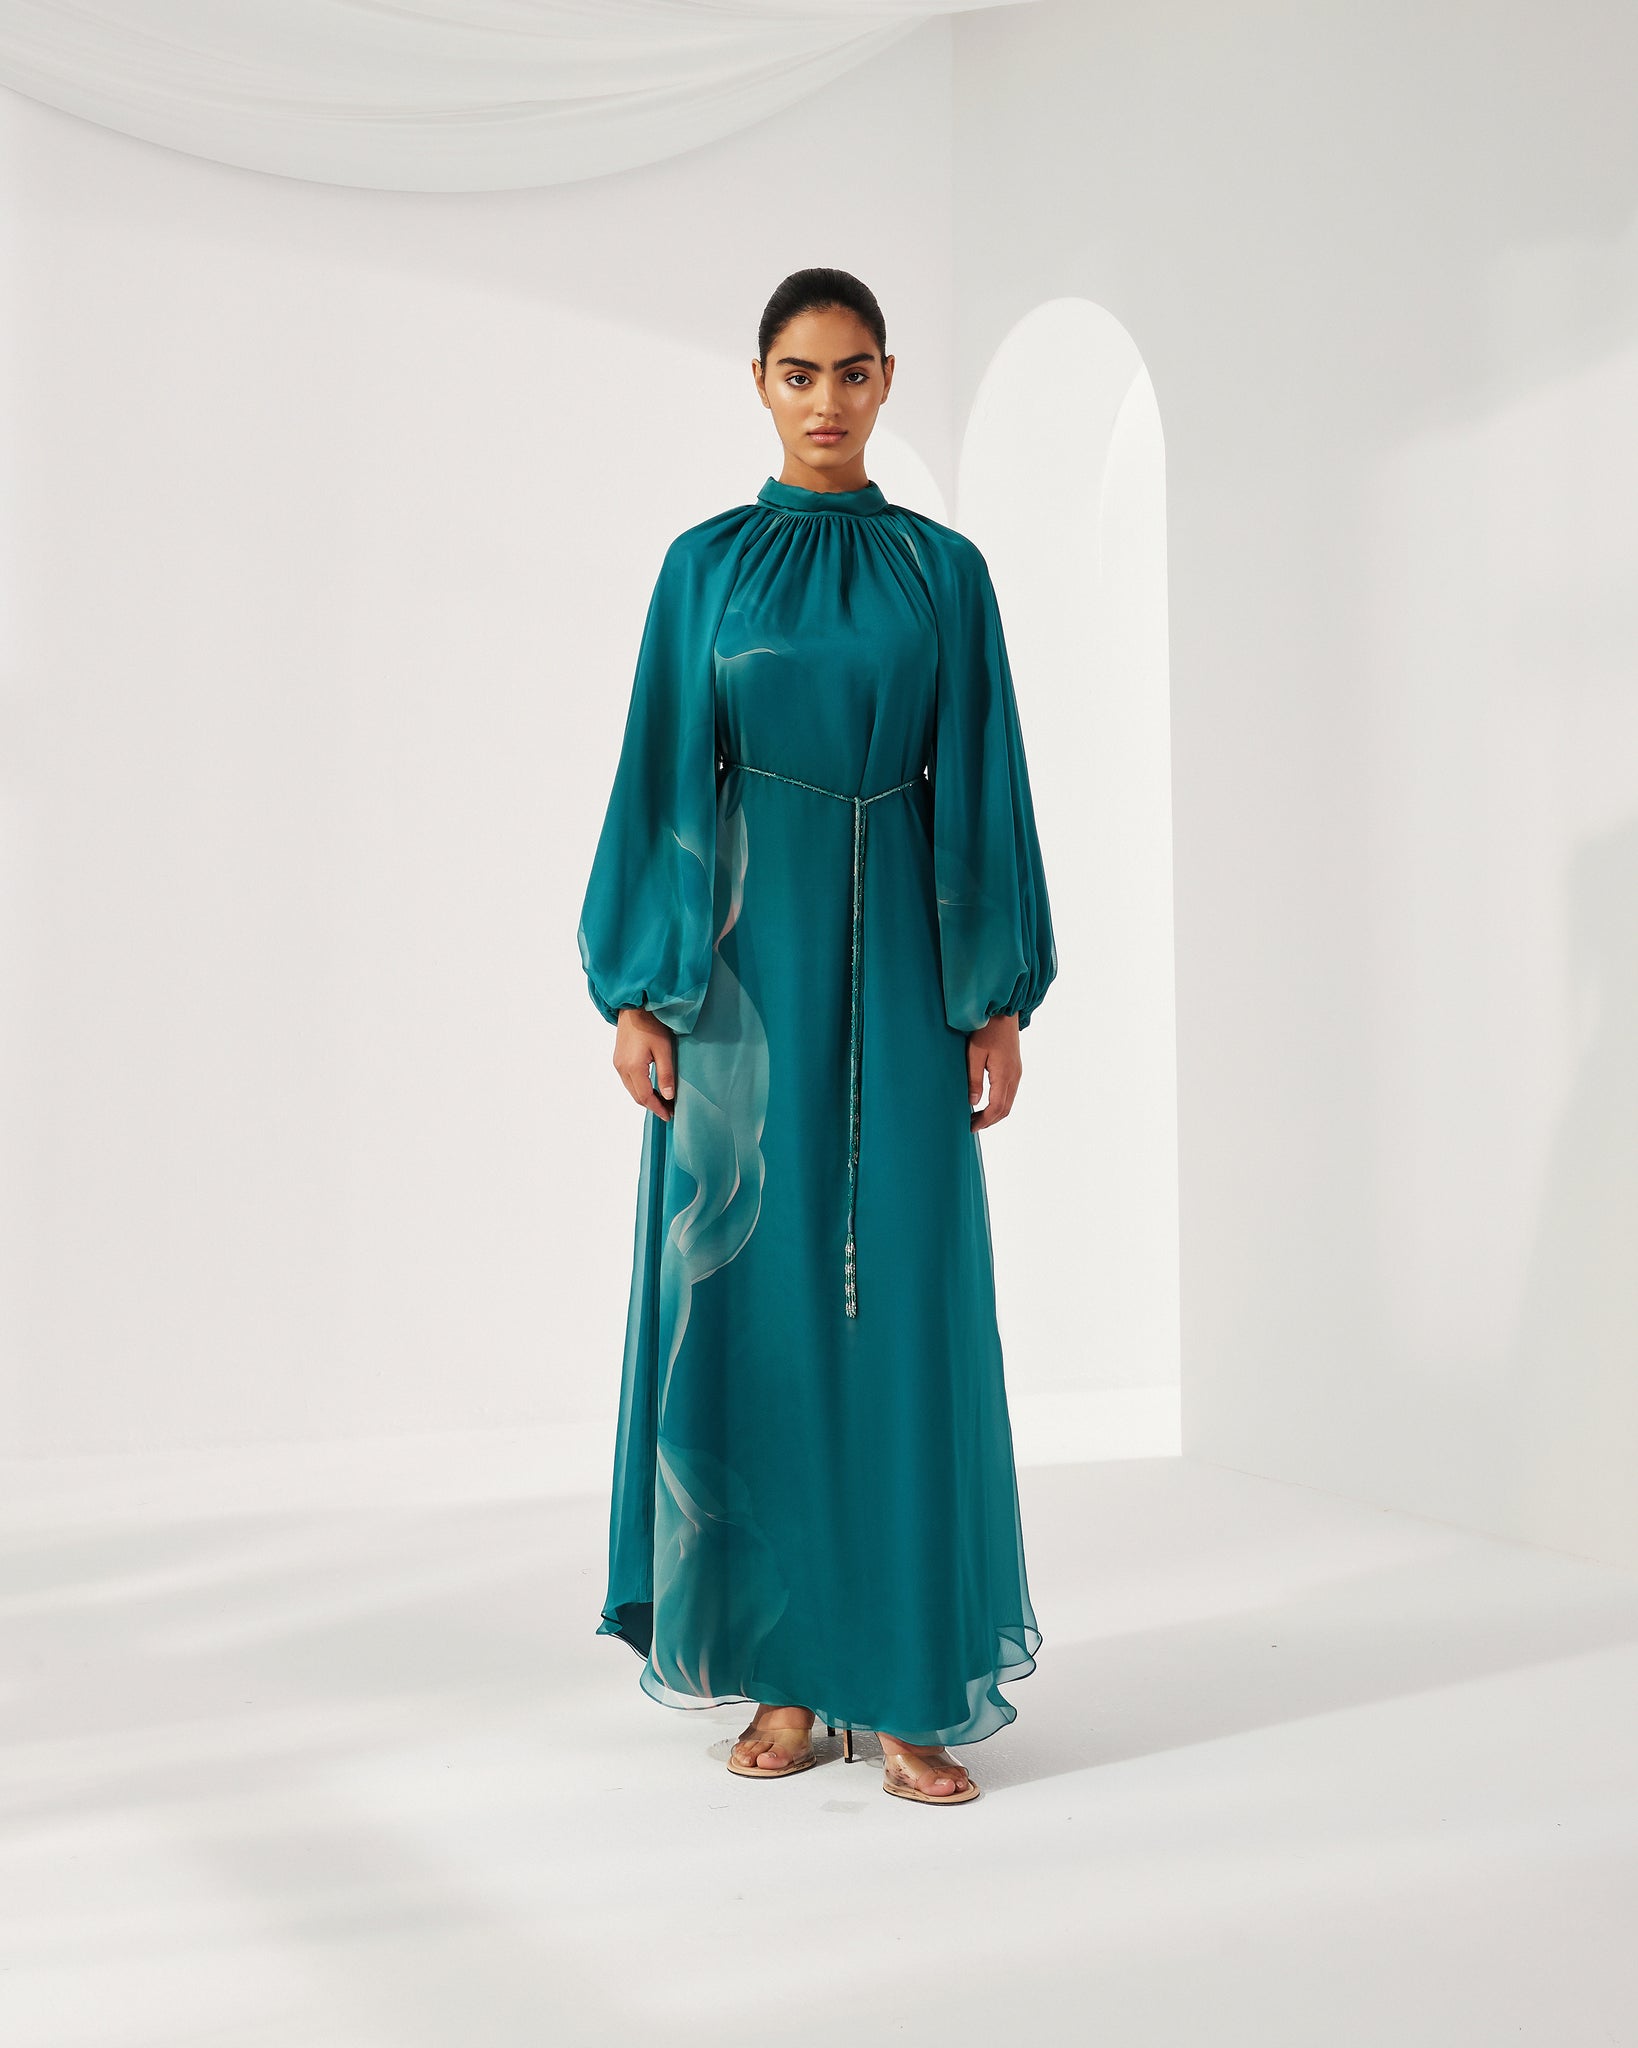 TEAL PRINTED CHIFFON OVERSIZED DRESS WITH BELT